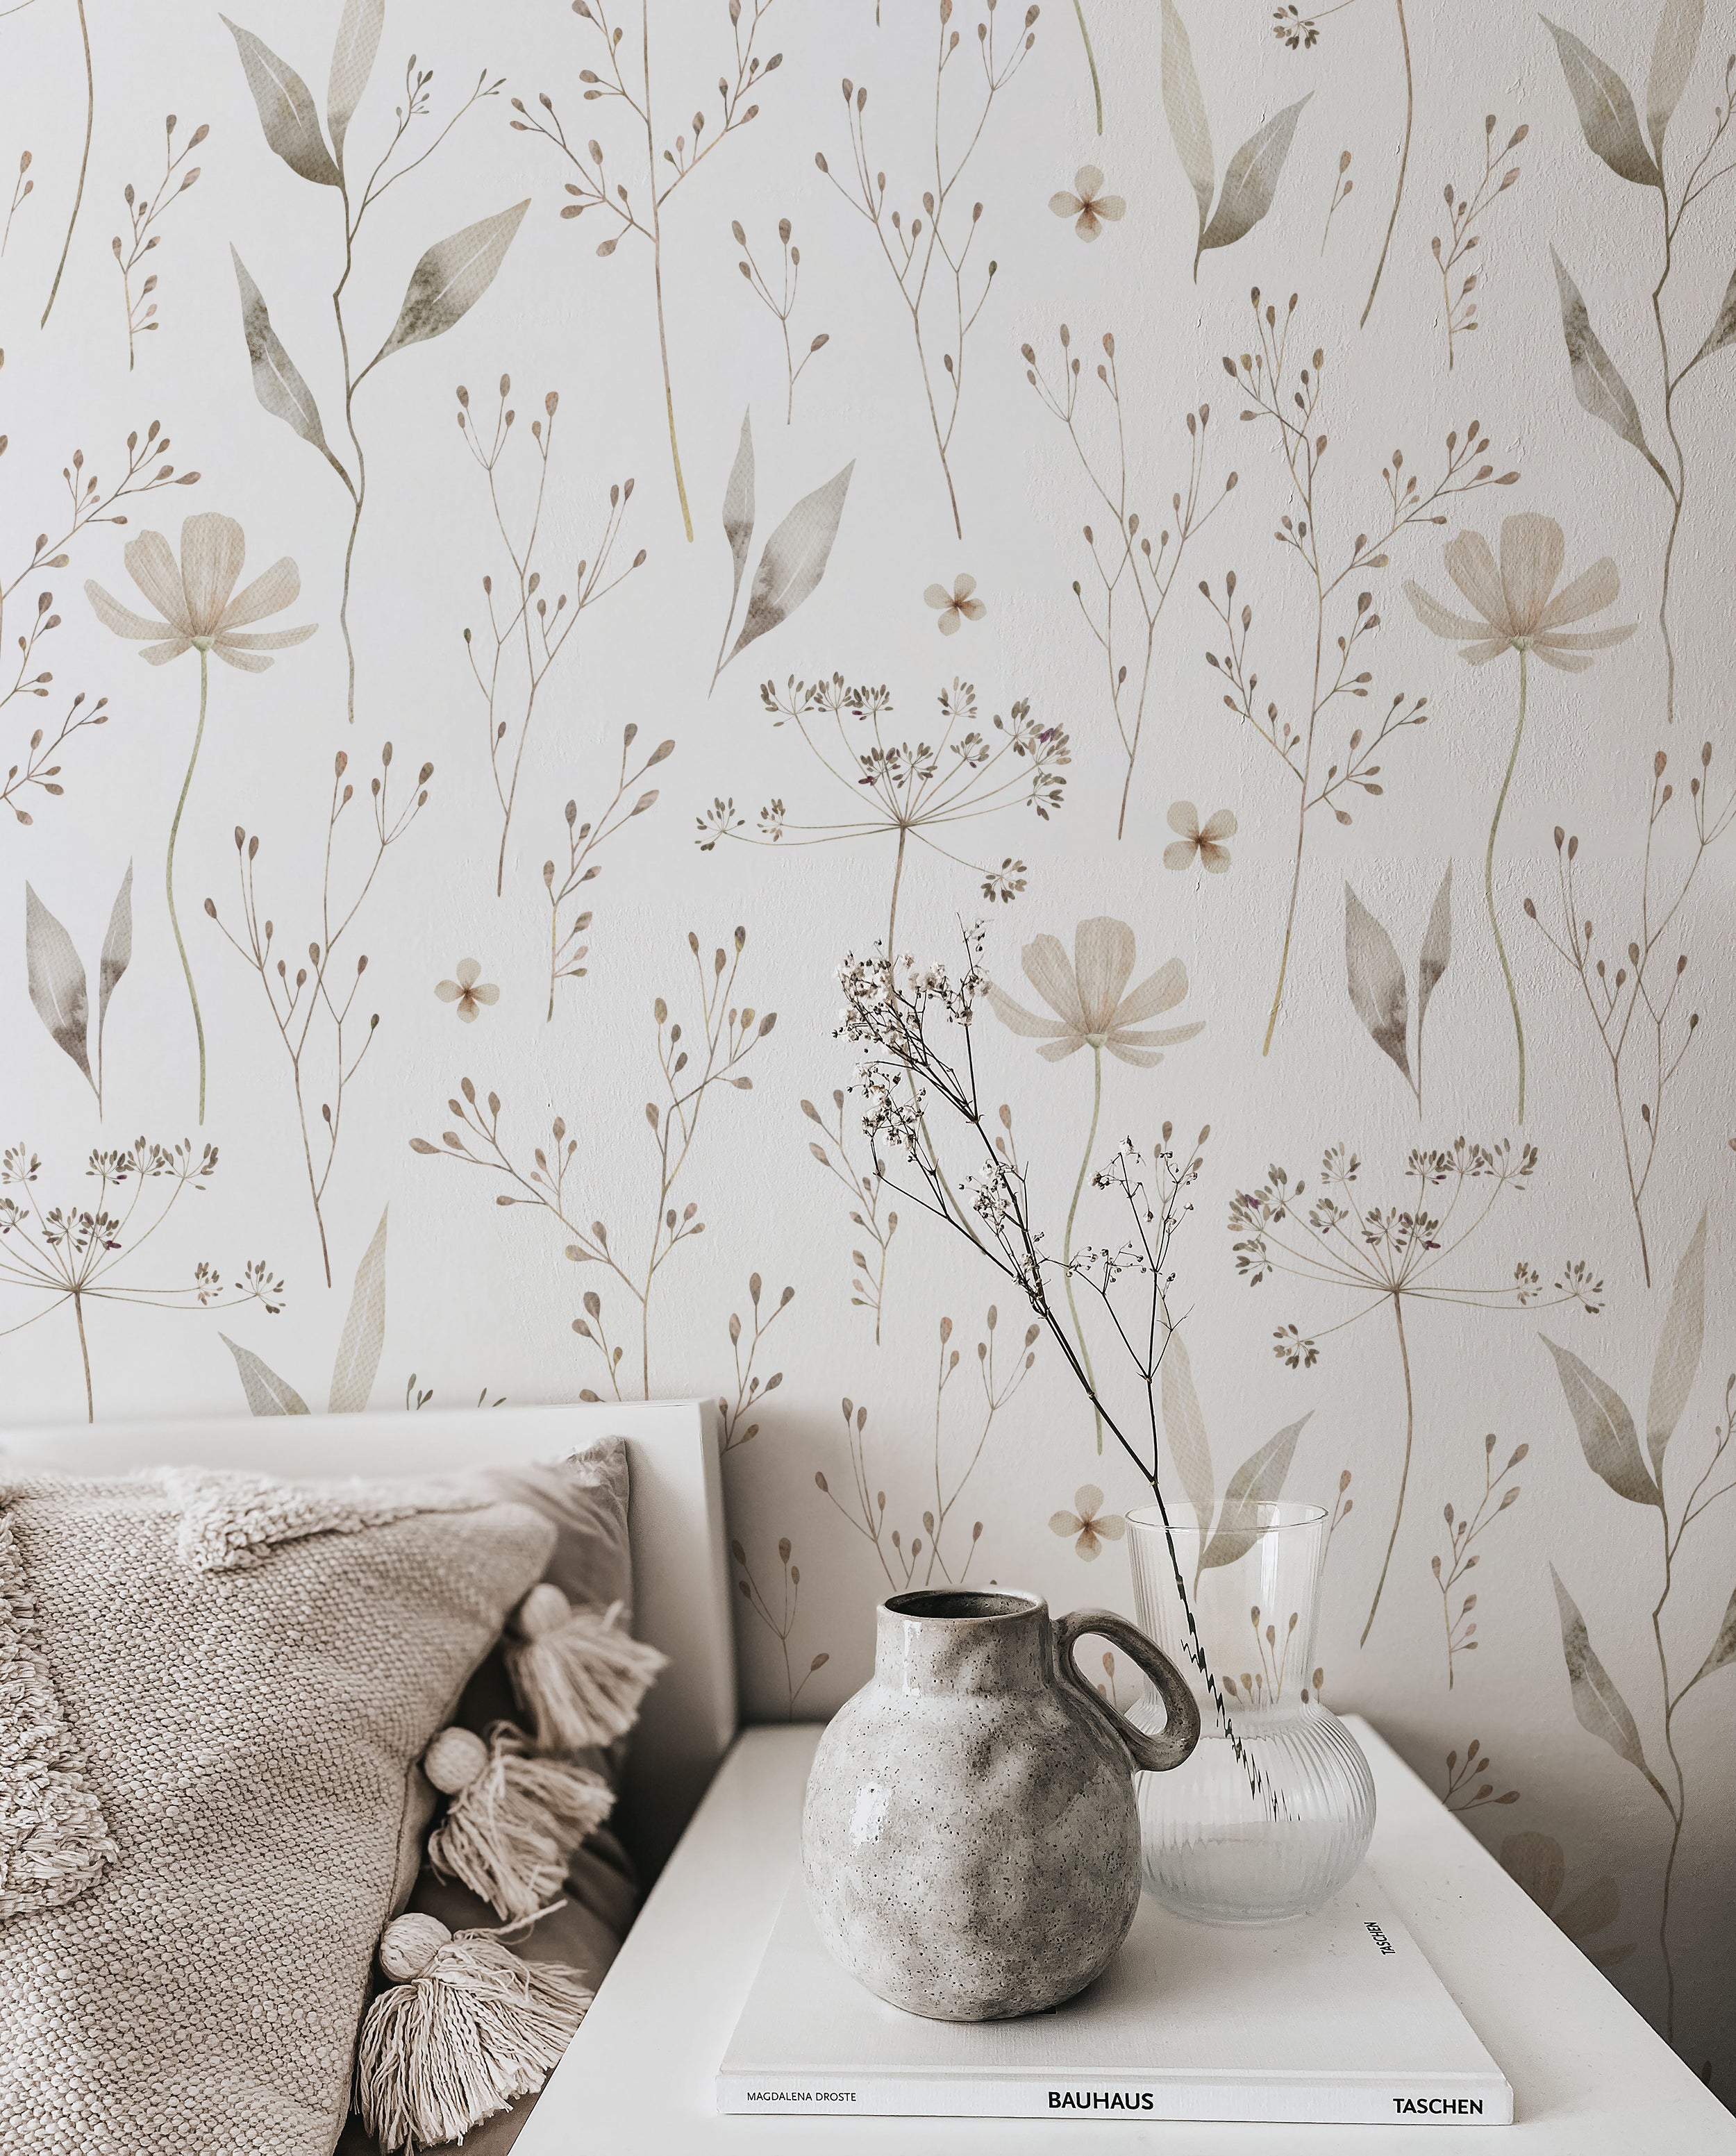 An elegant setting with Tranquil Bloom Wallpaper, where the intricate flower and leaf designs add a soothing and sophisticated touch to the decor, enhancing the room's overall ambiance of relaxation and comfort.